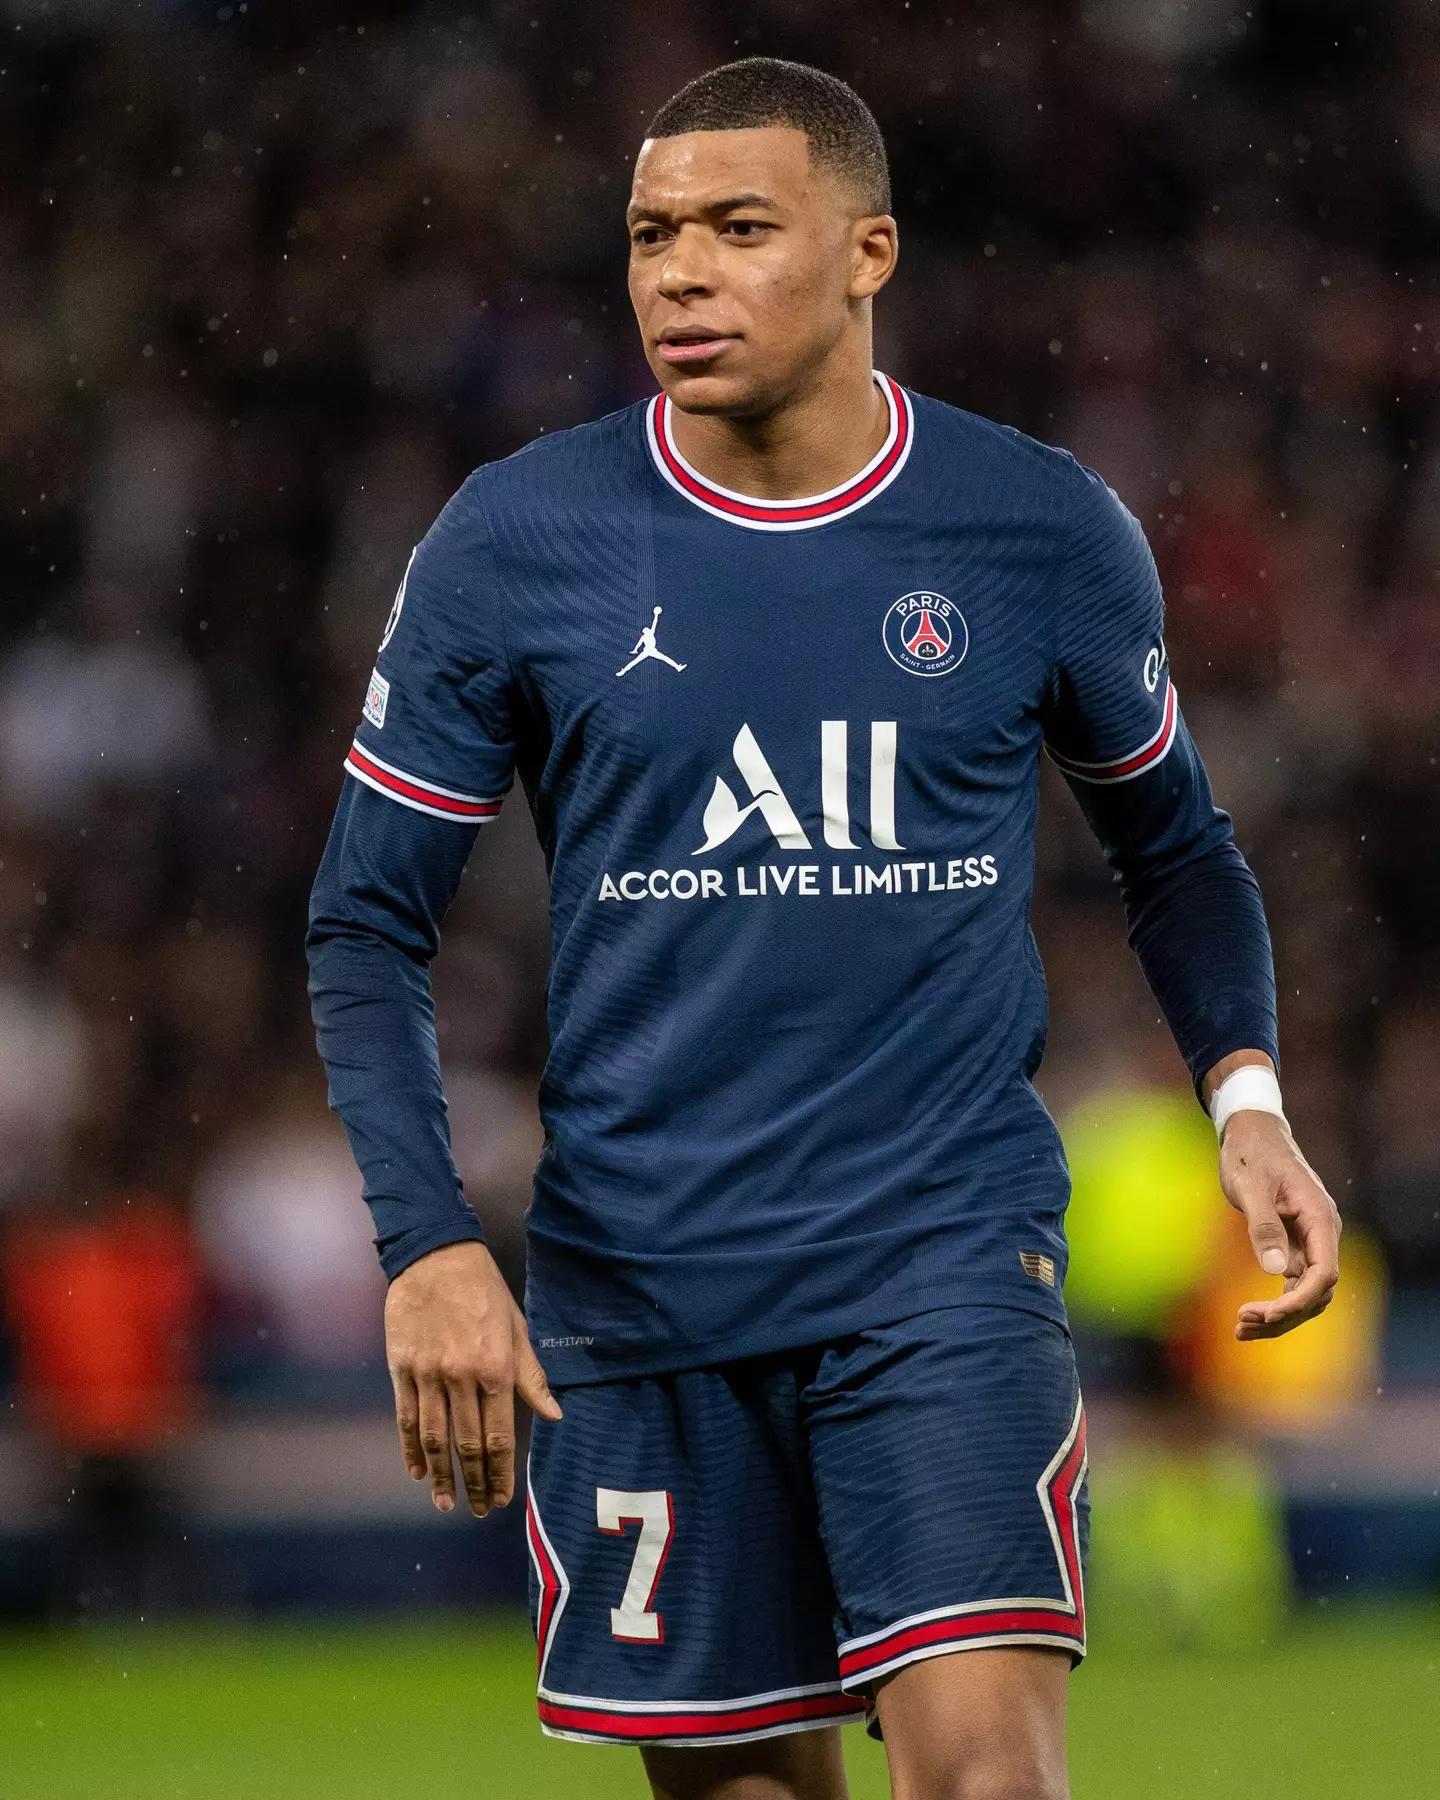 Mbappe has been strongly linked with a move to Madrid (Image: PA)